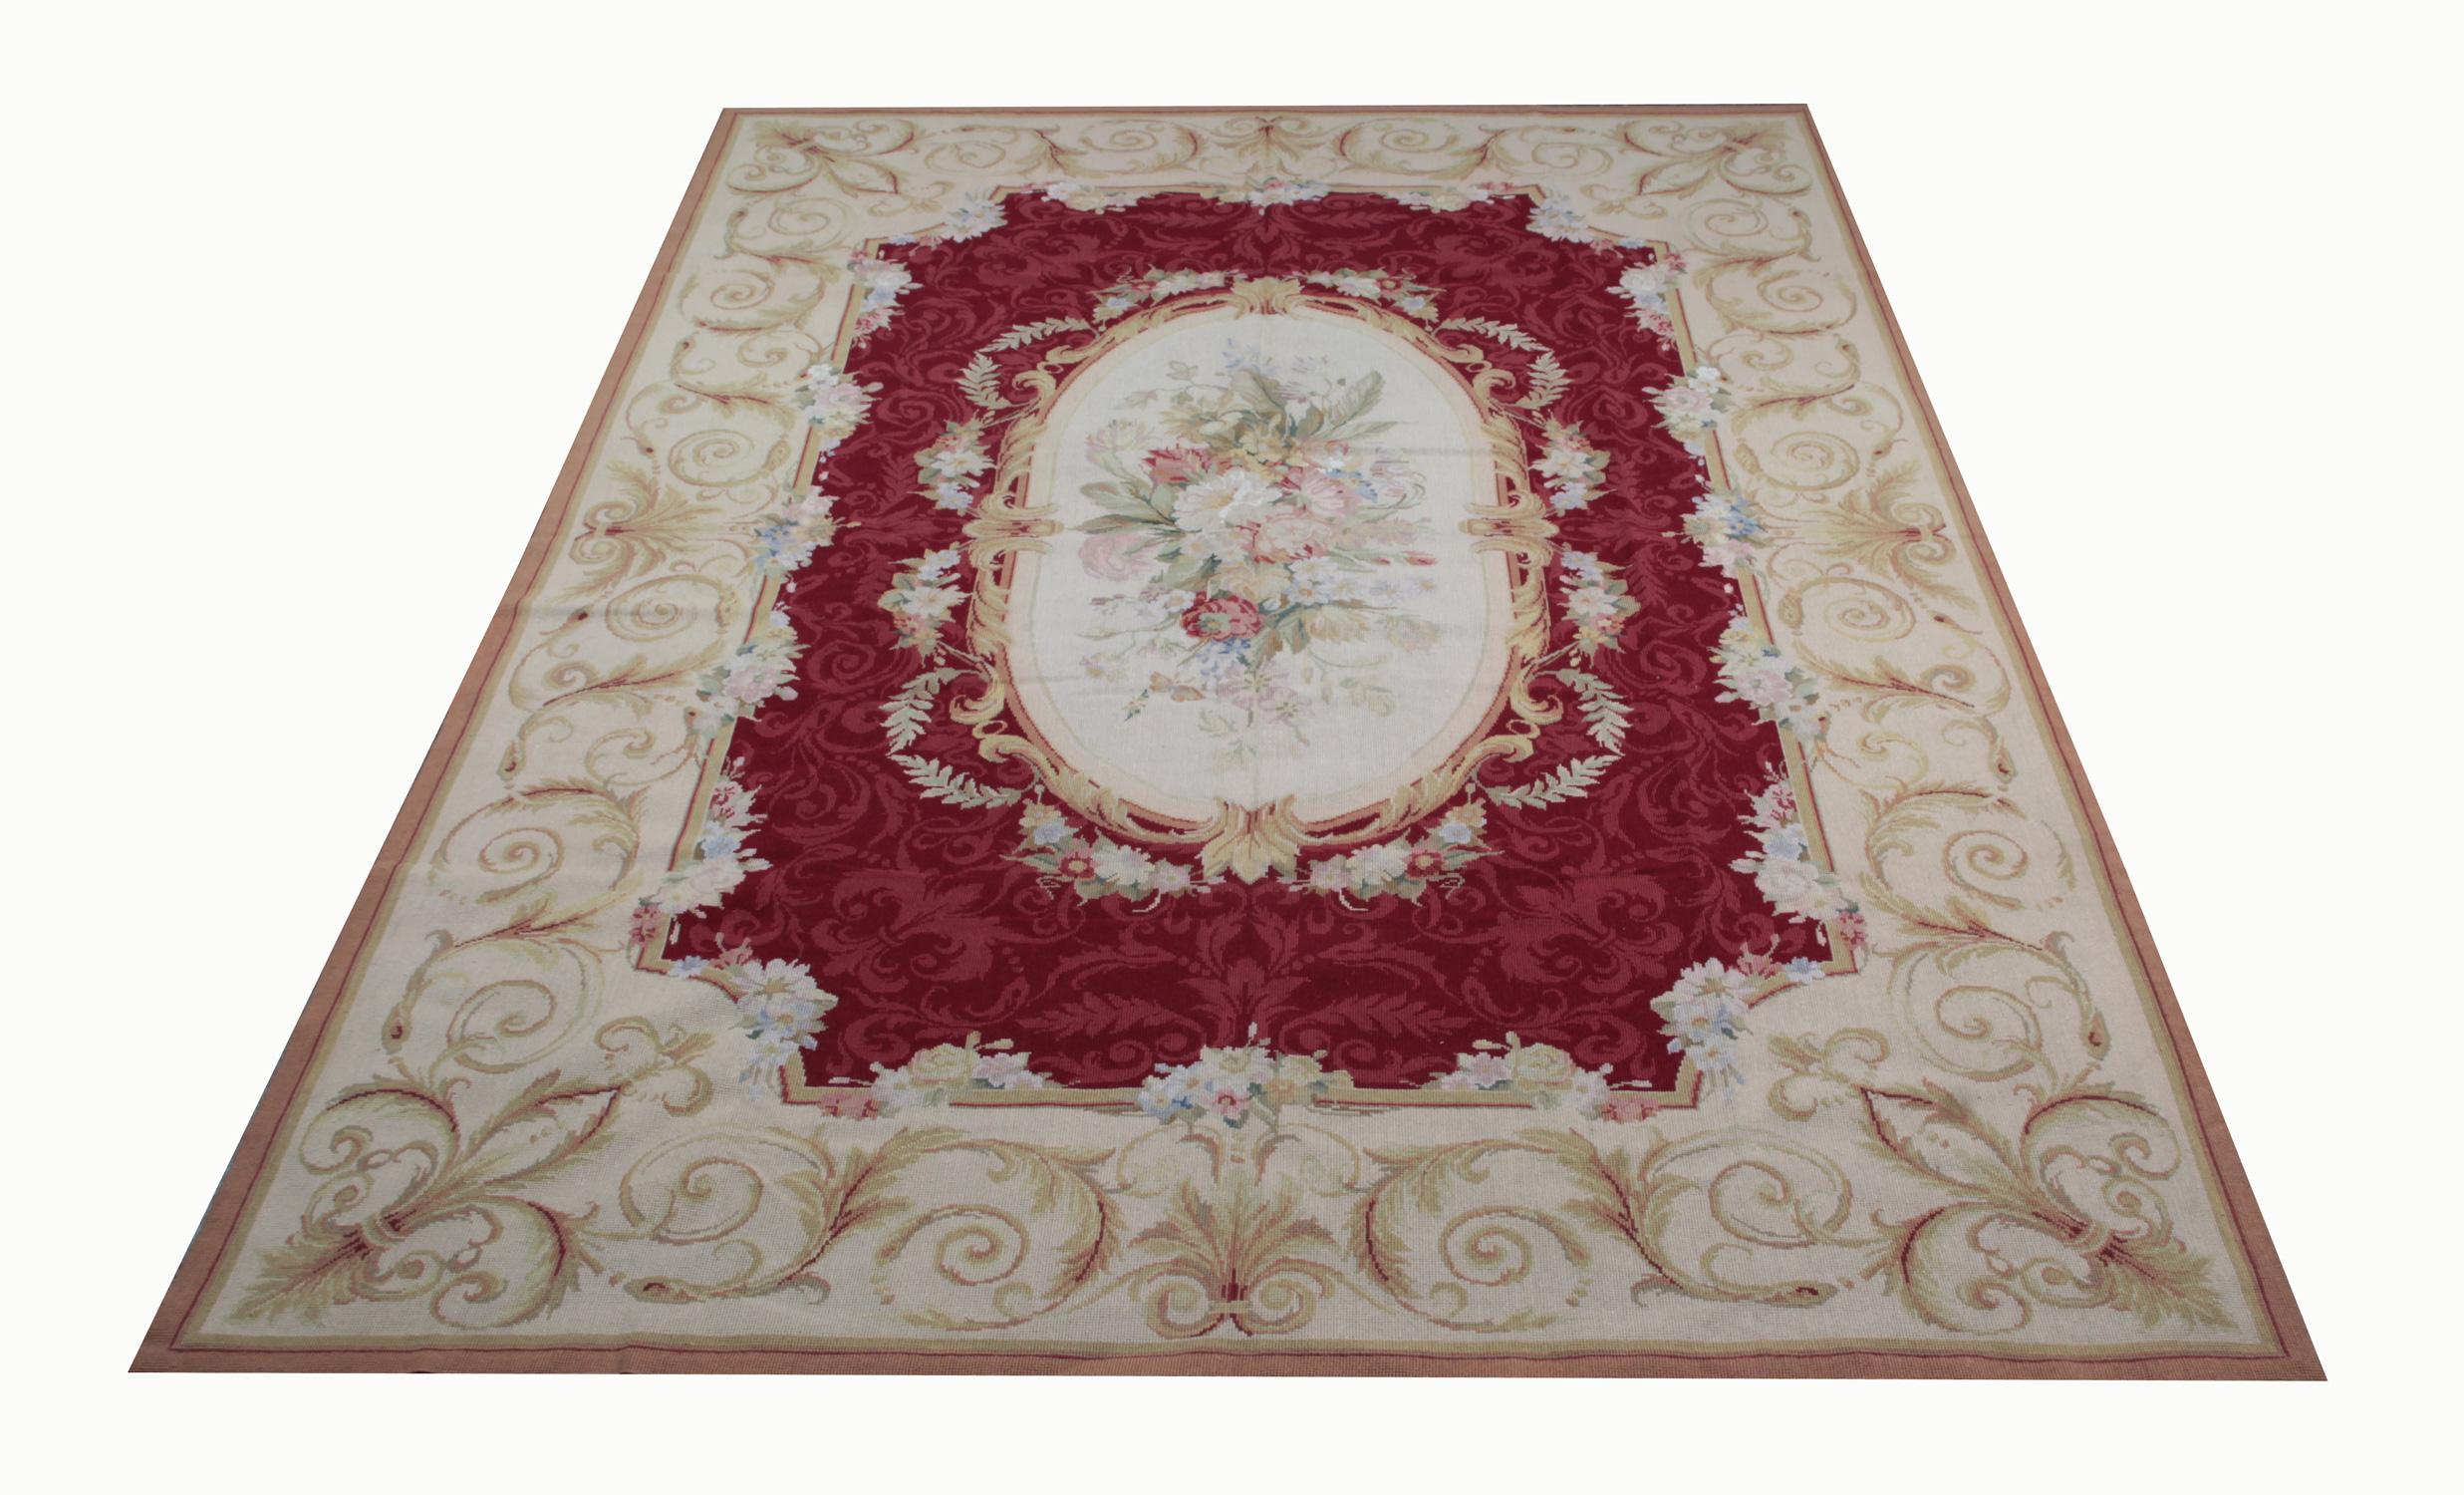 Chinese Vintage Aubusson Style Needlepoint Rug, Handmade Carpet Tapestry Wall Hanging